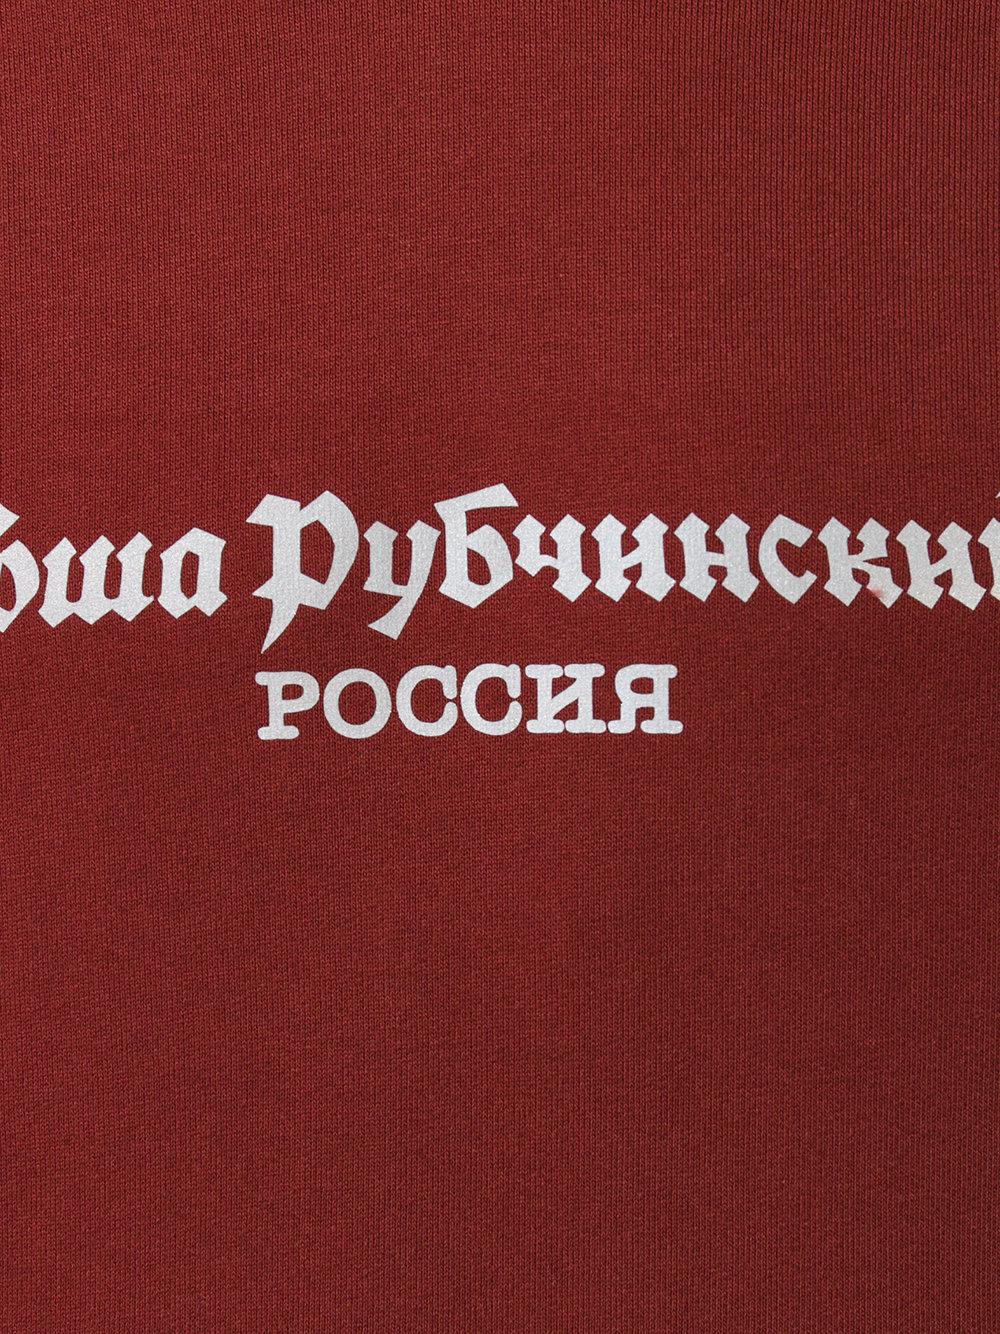 Gosha Rubchinskiy Cotton Hoodie With Logo in Red for Men - Lyst